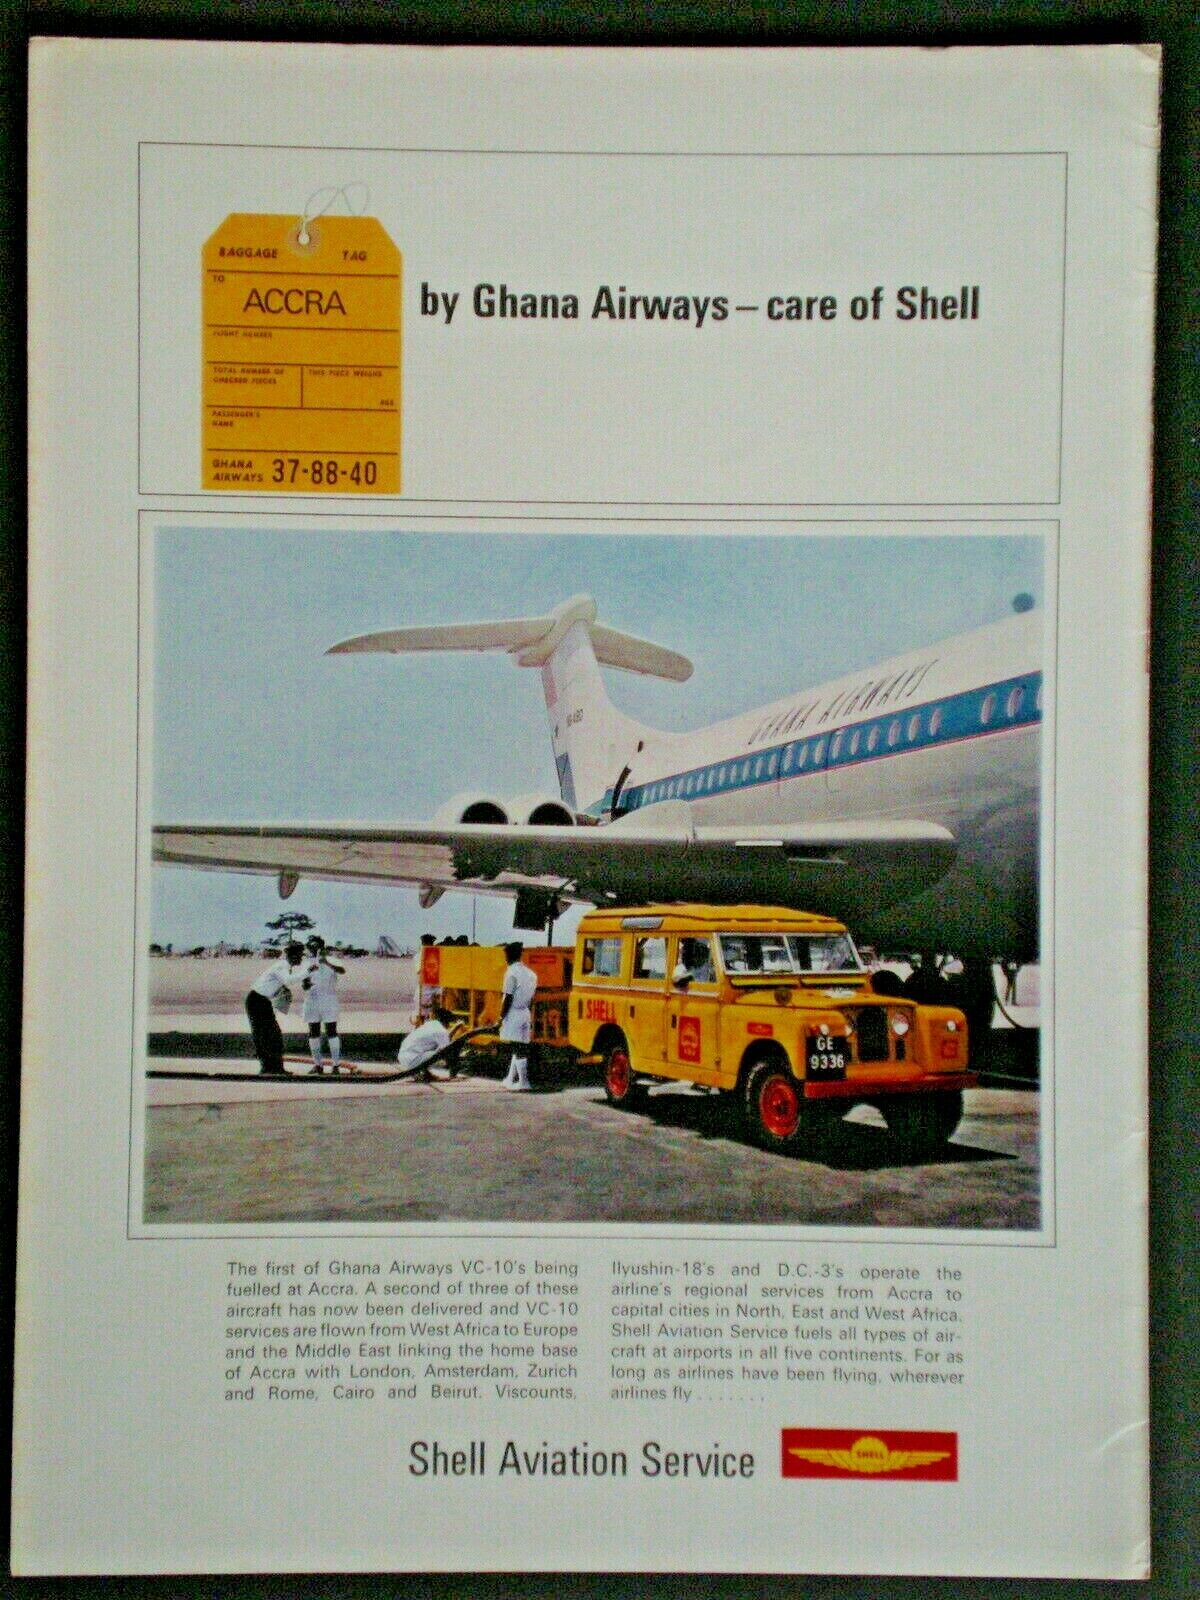 1965 GHANA AIRWAYS VC-10 ACCRA AIRPORT photo Shell Aviation Oil ad